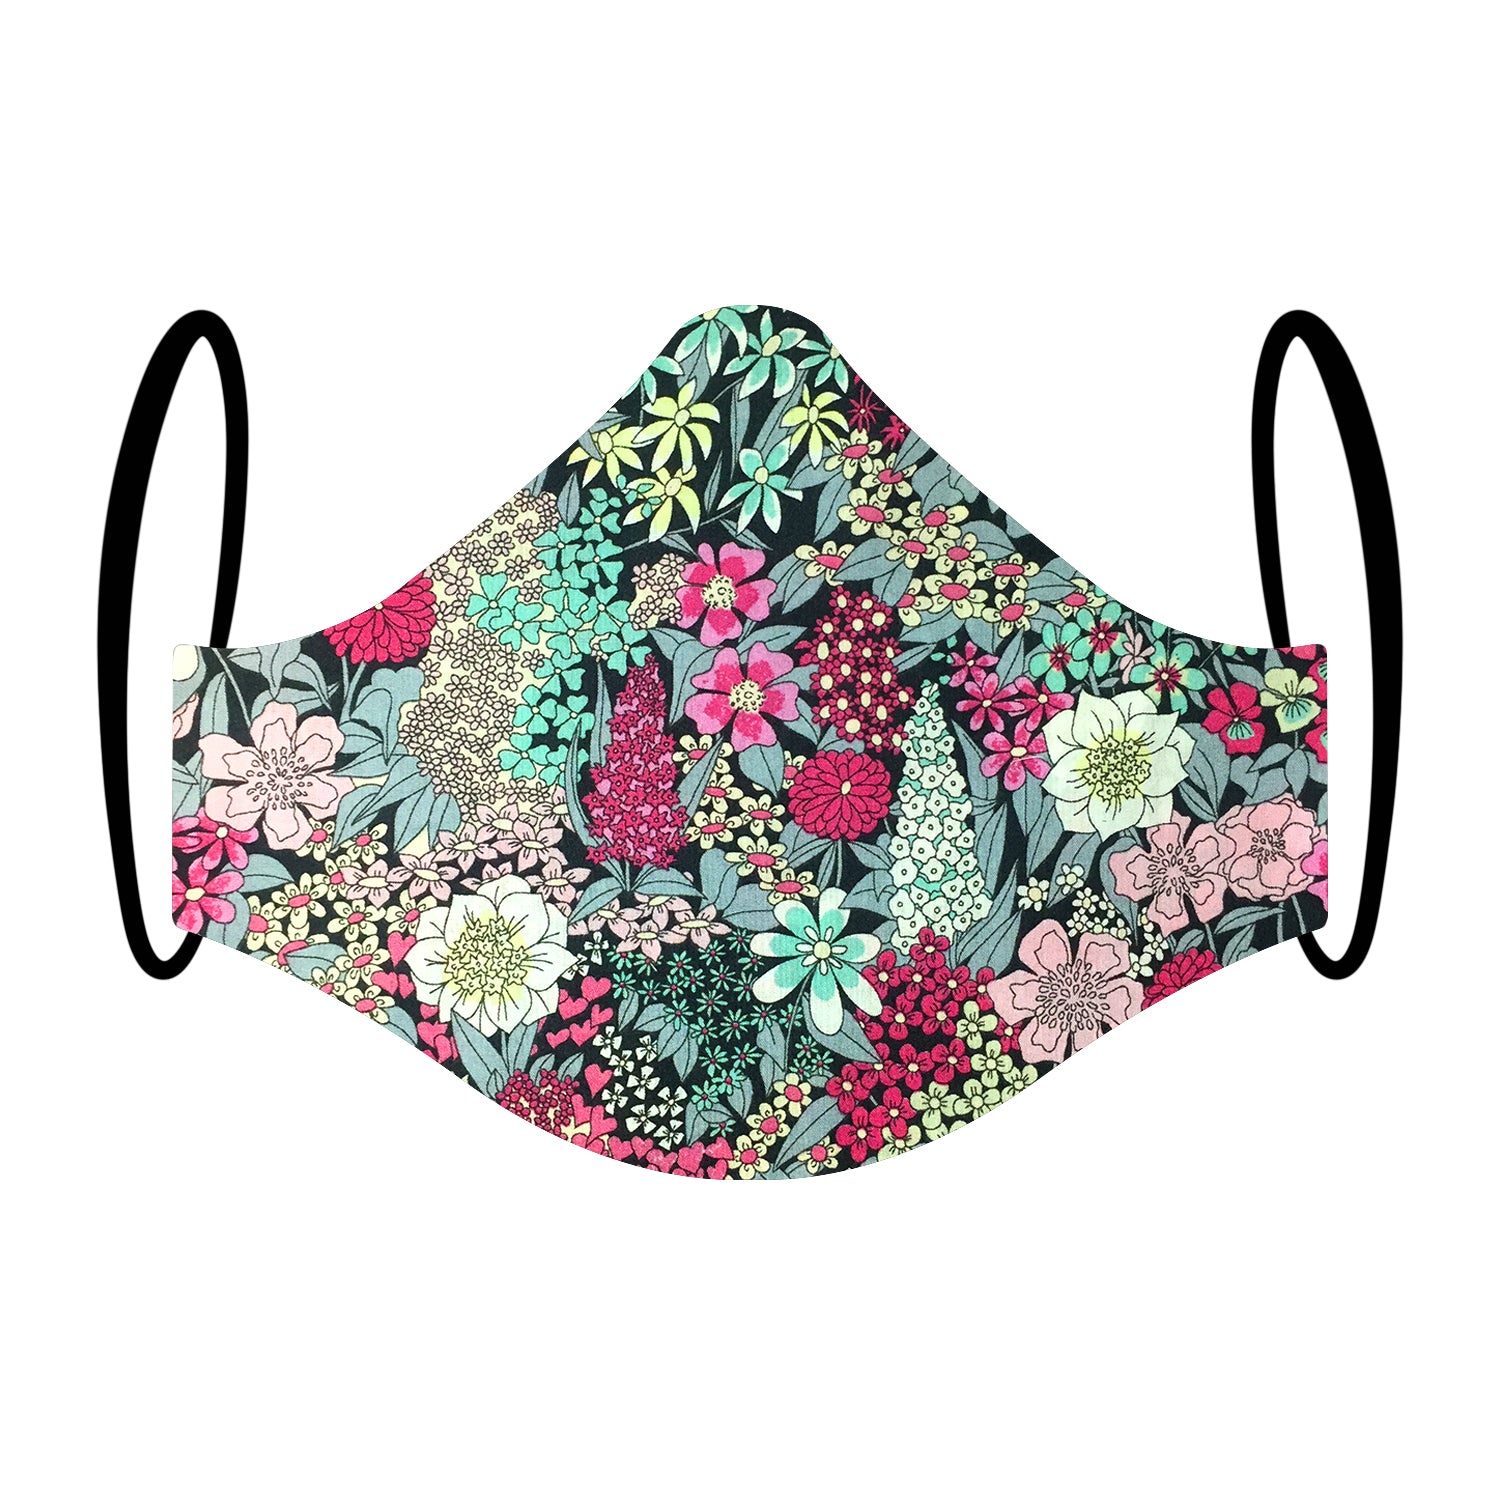 "Hardly Seen Evergreen" Floral Print Triple-layer Washable Face Mask